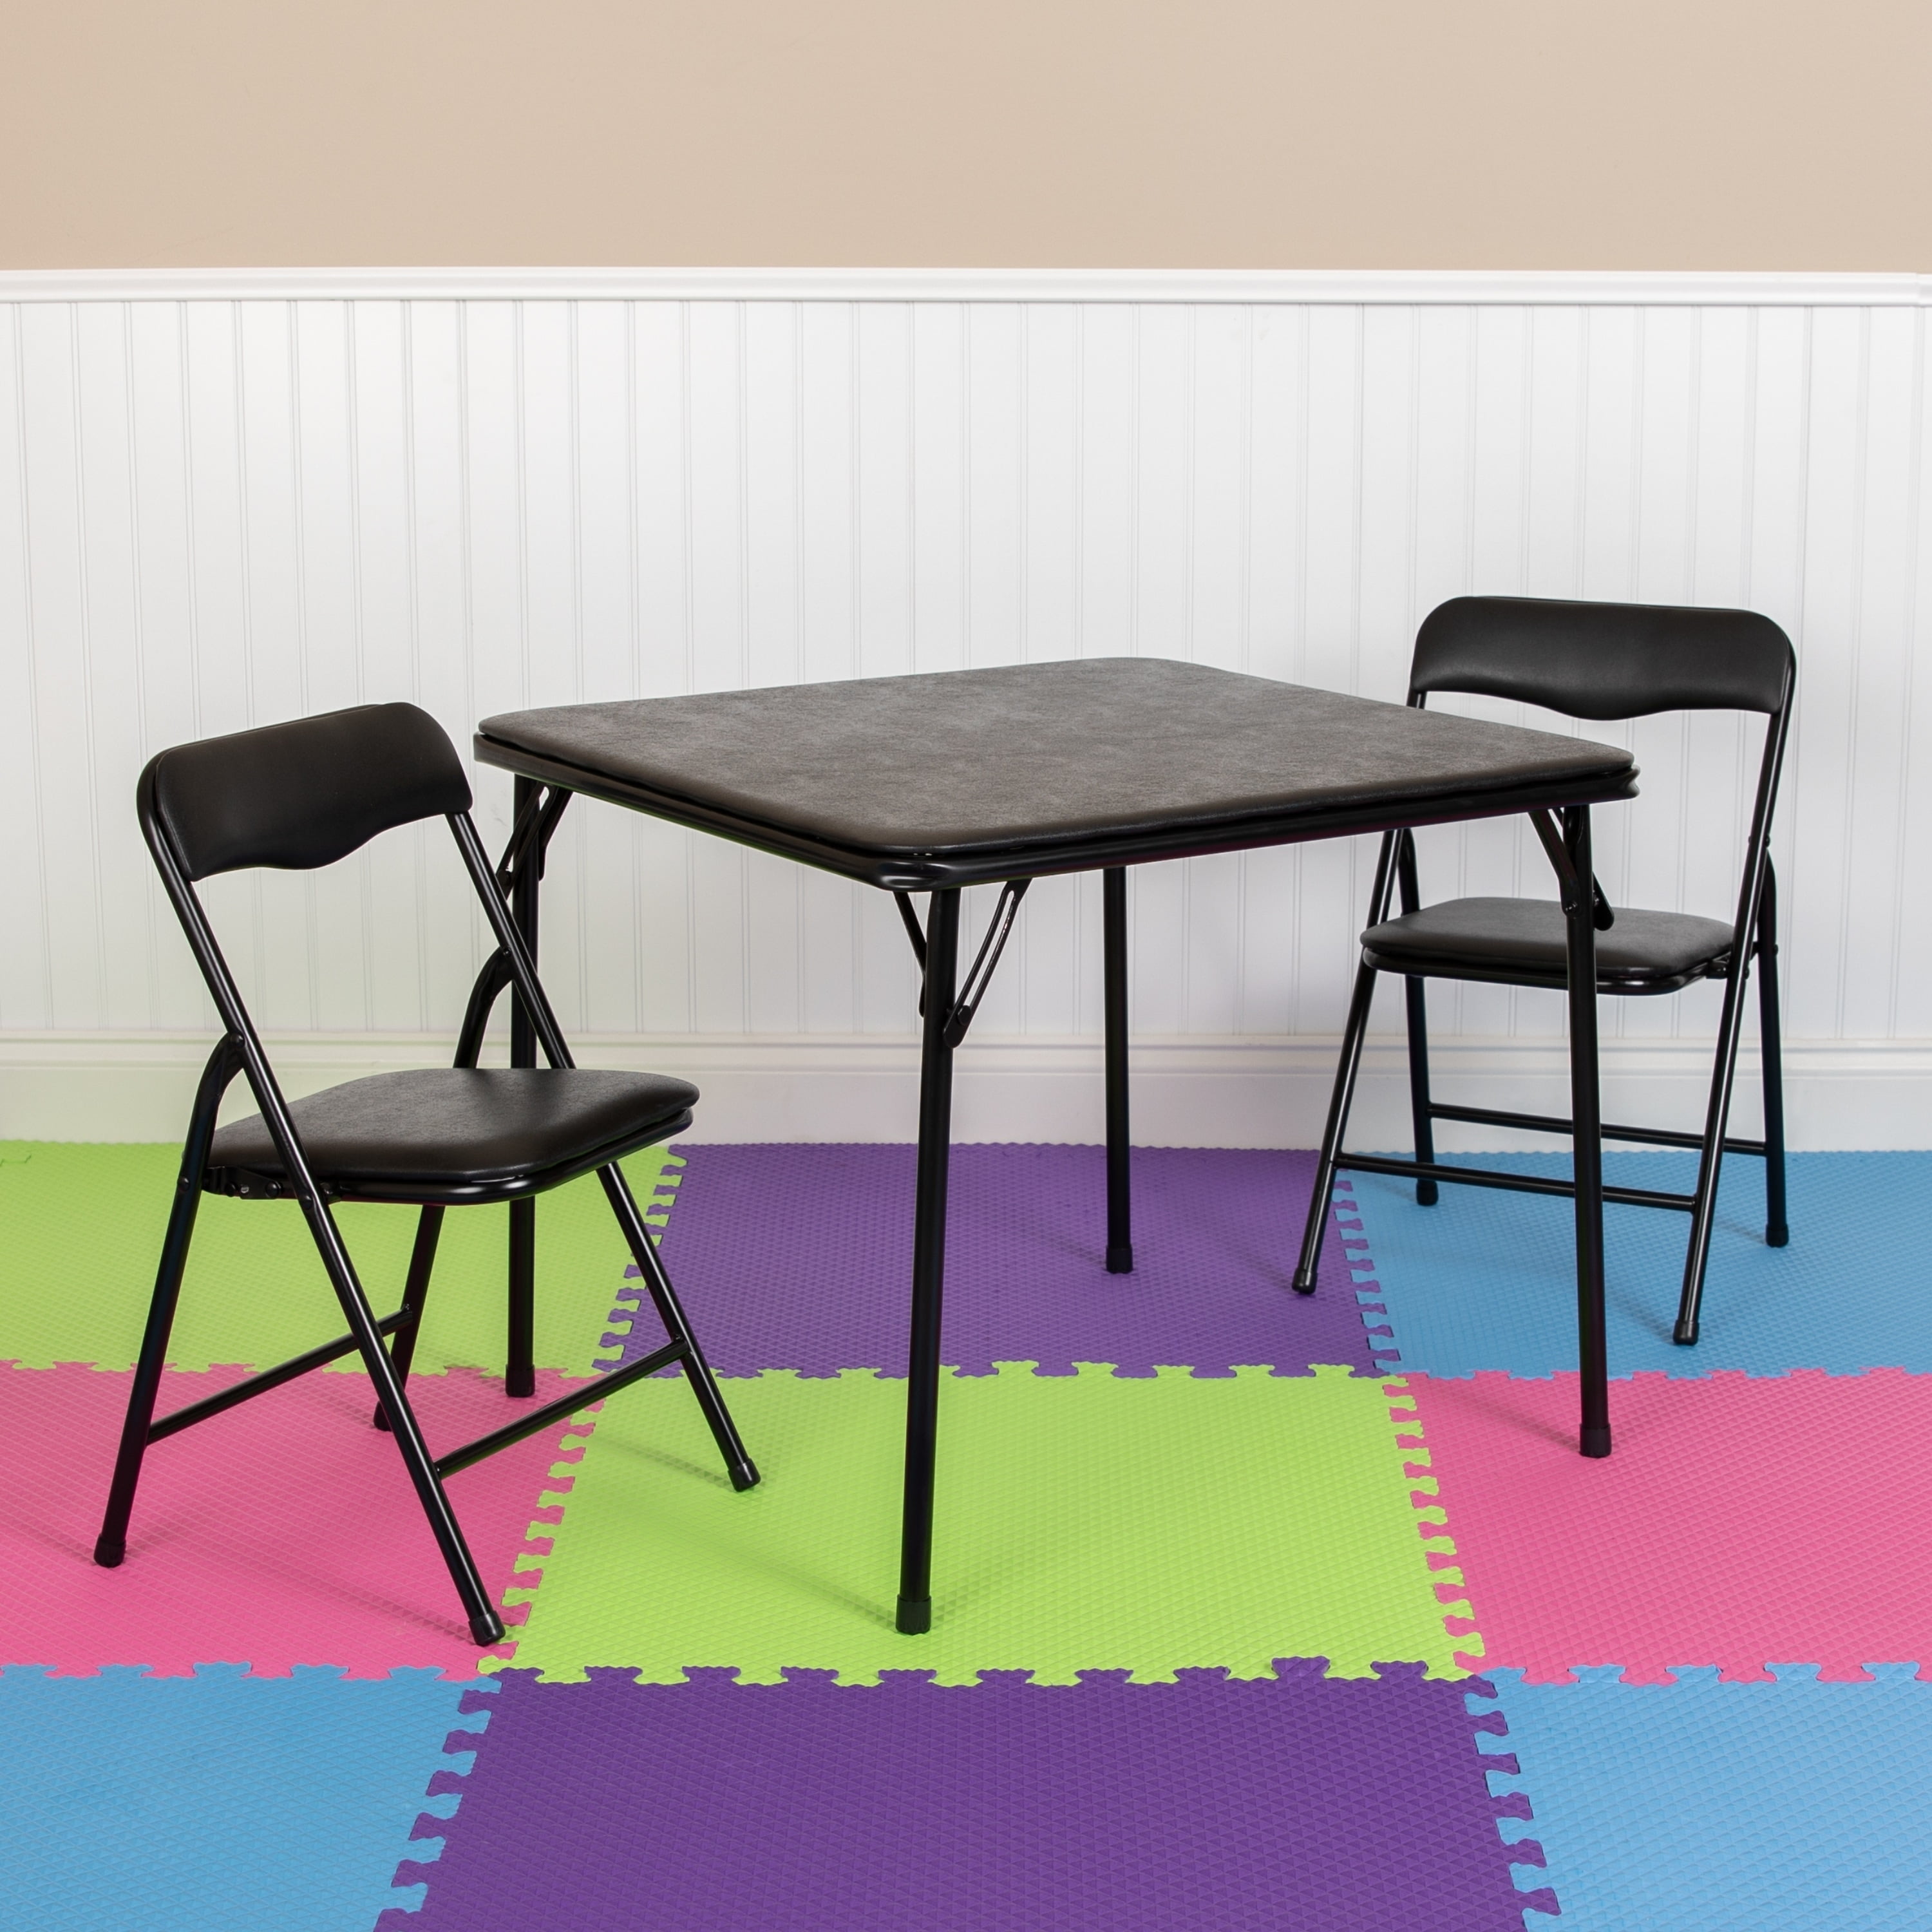 Lancaster Home Kids 3 Piece Folding Table and Chair Set - Kids Activity